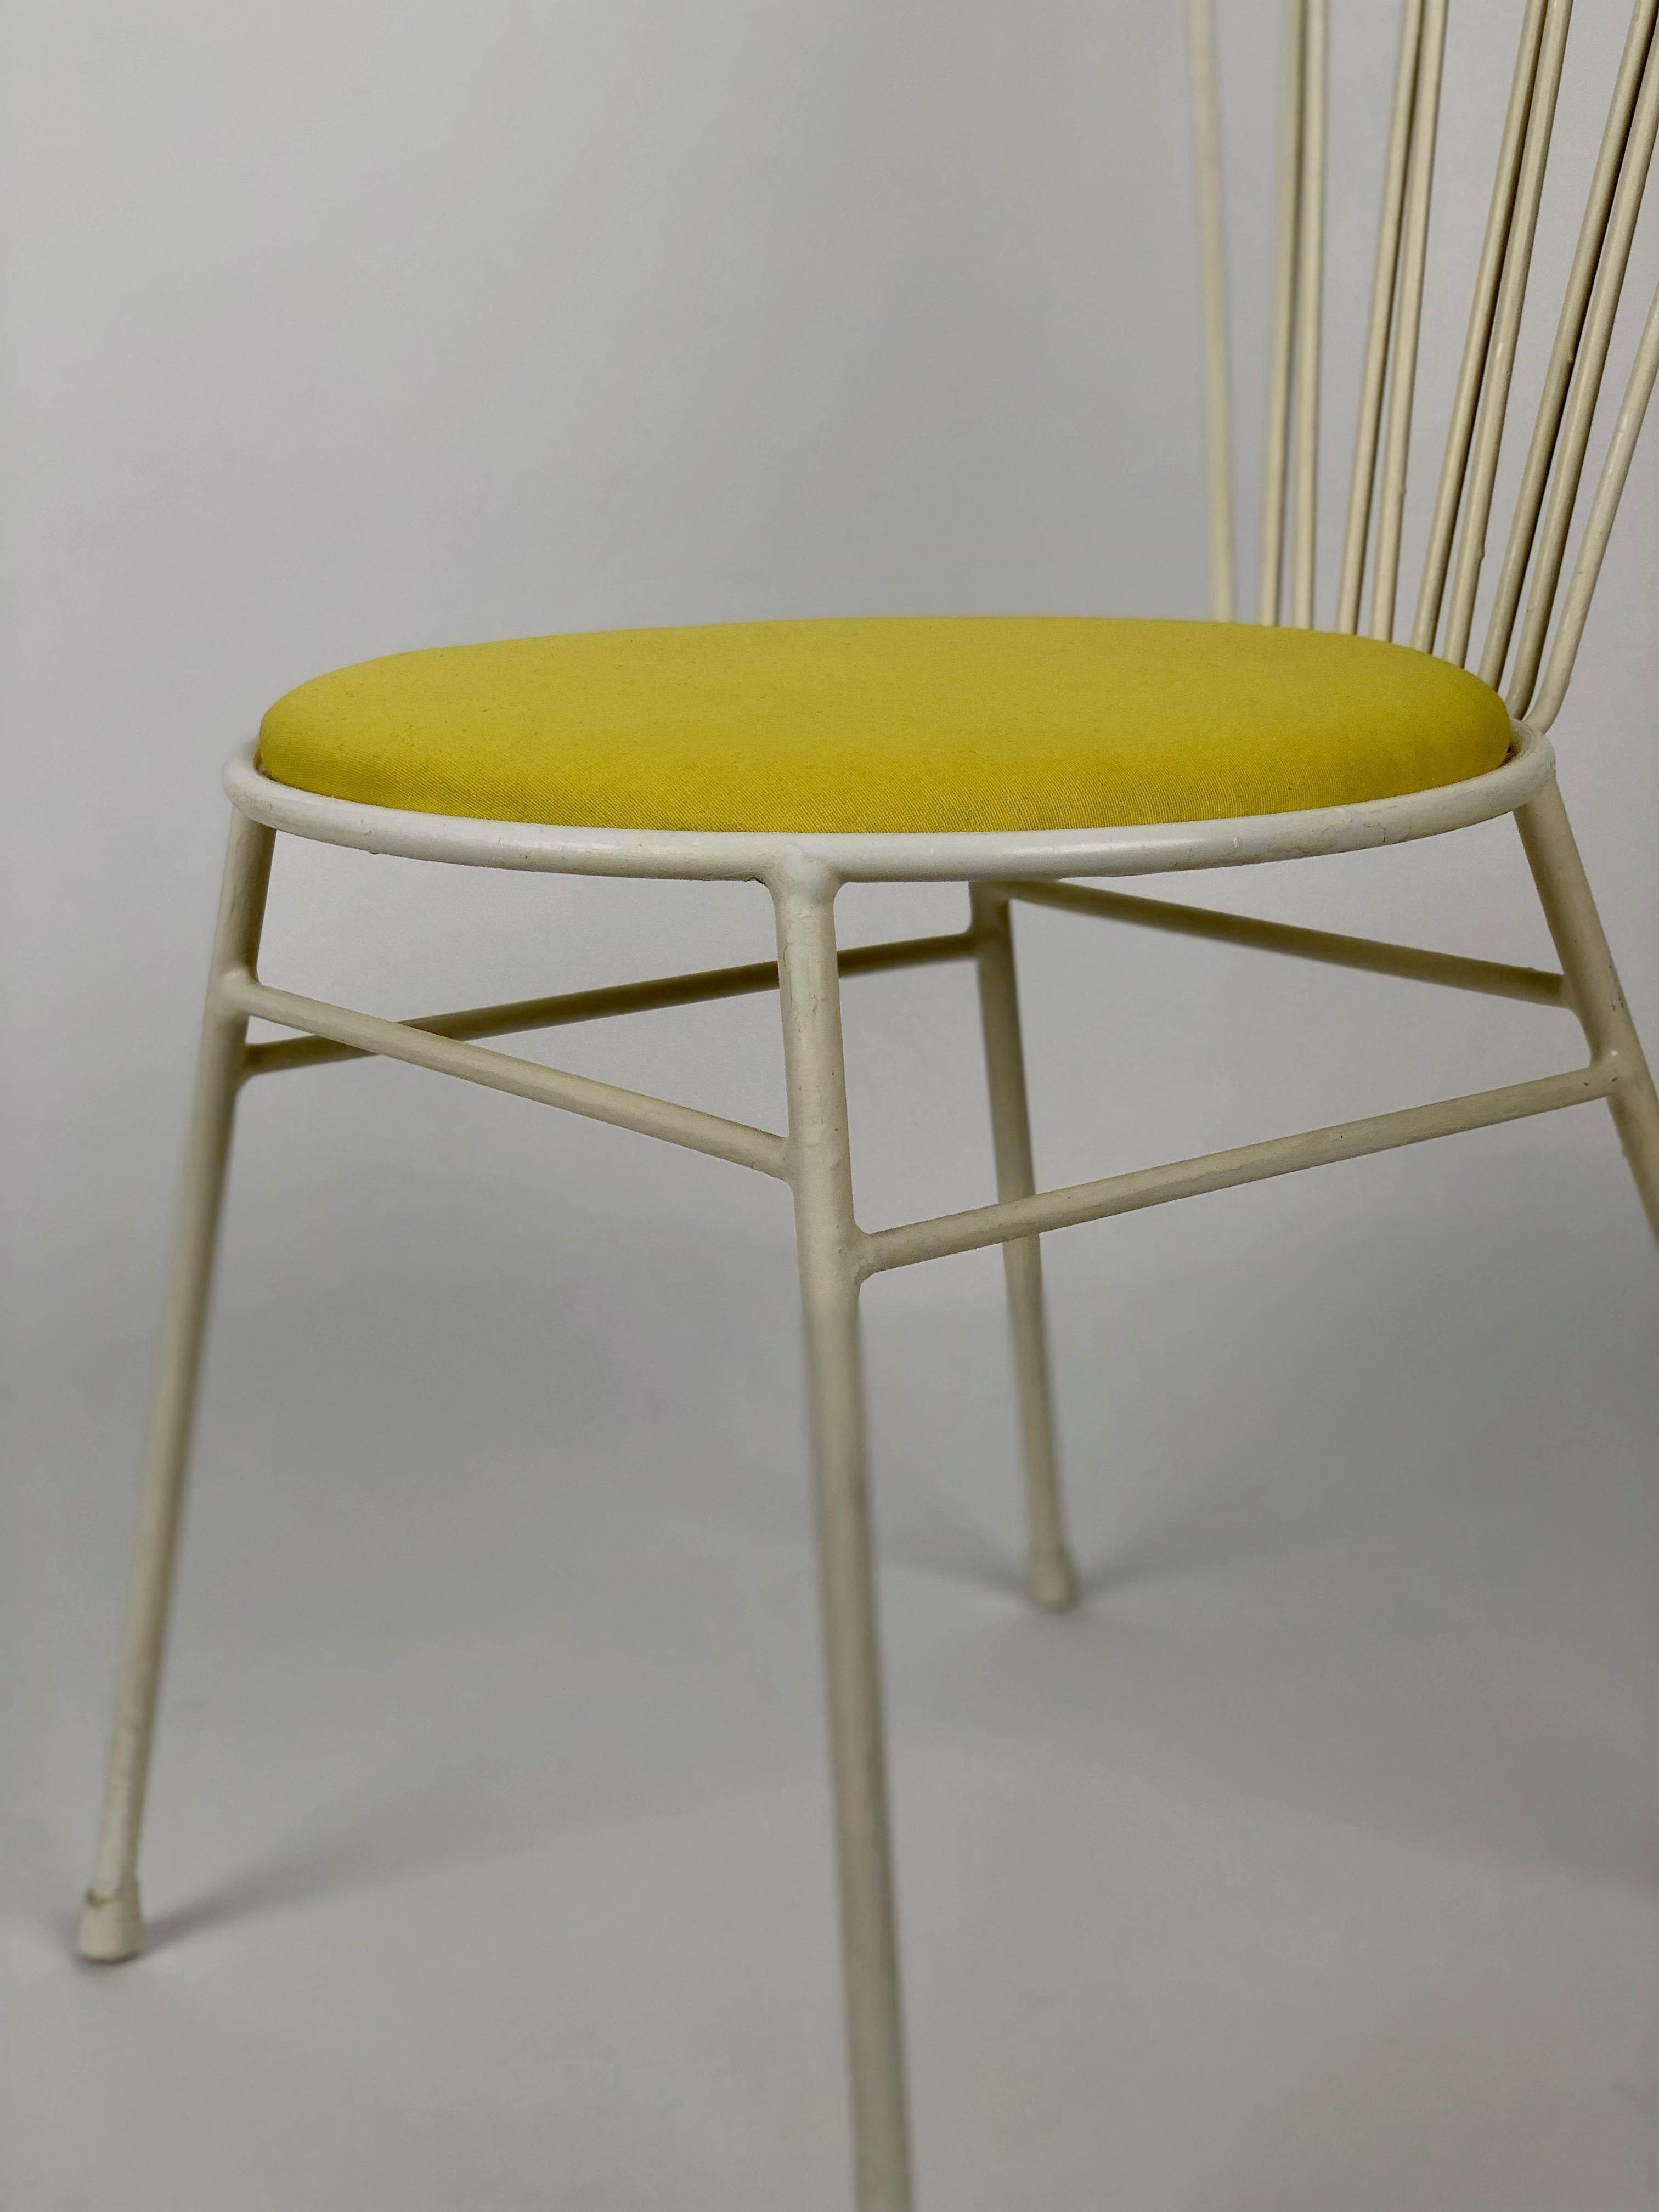 Painted Mid Century Garden Chair from Austria For Sale